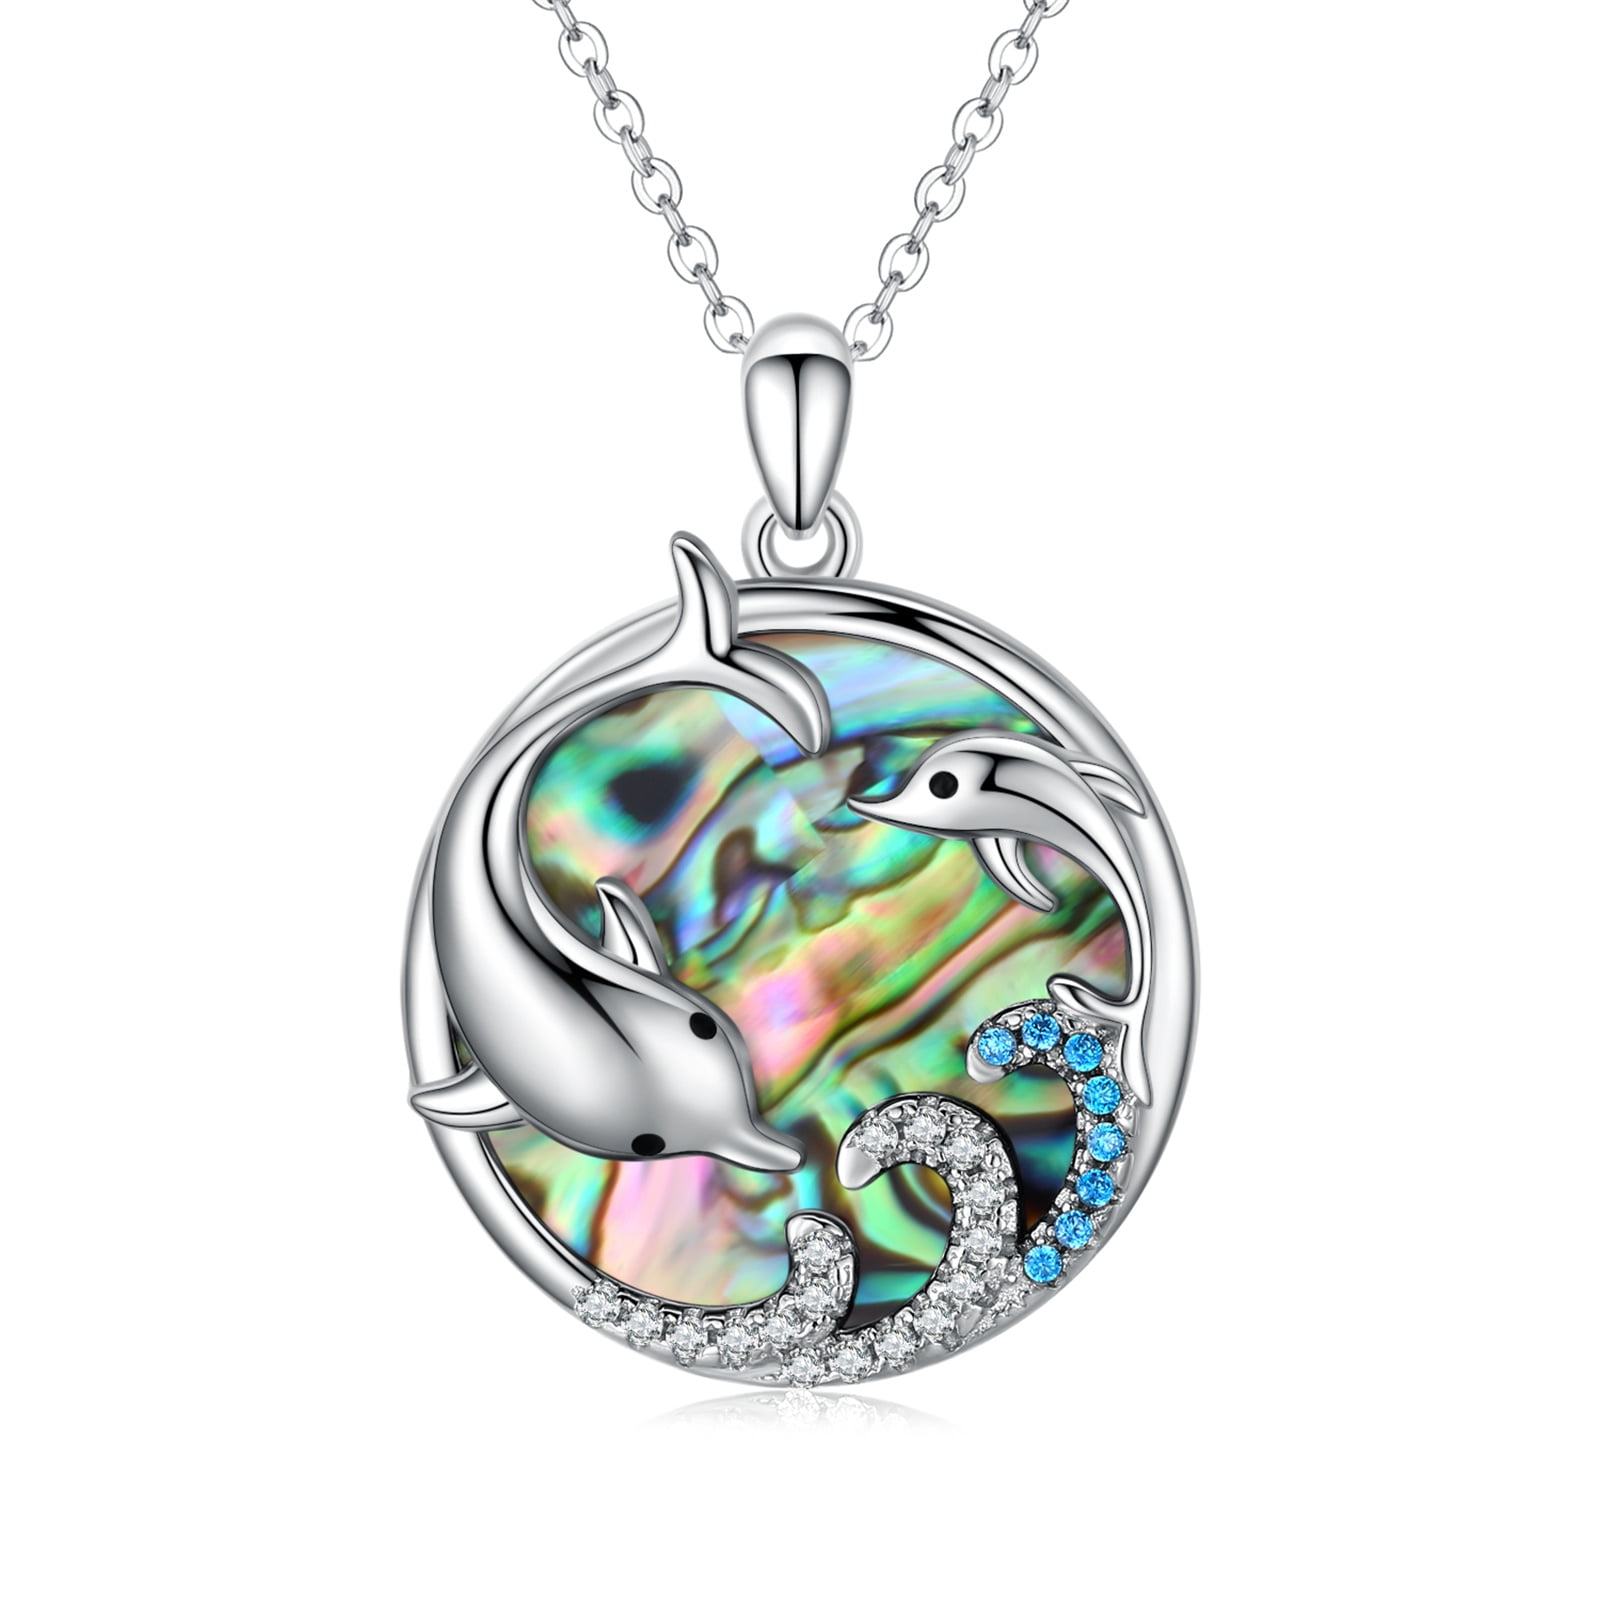 Silver Tone Abalone Seahorse Pendant Necklace Gift Boxed Fast Shipping 